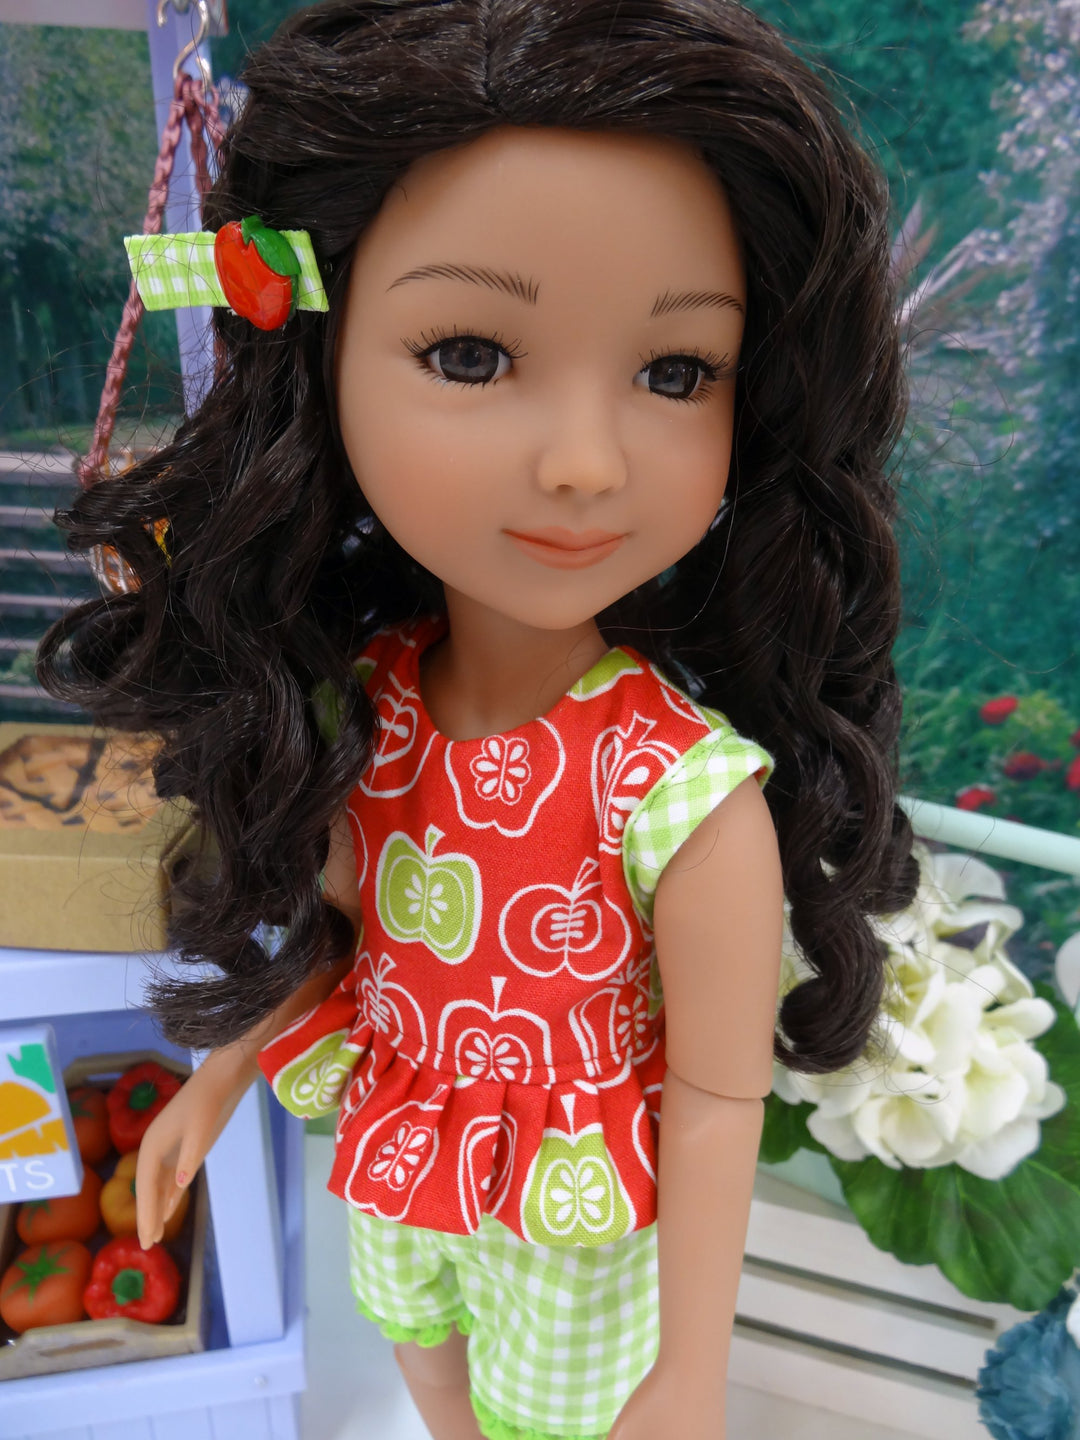 Orchard Apples - top & shorts for Ruby Red Fashion Friends doll